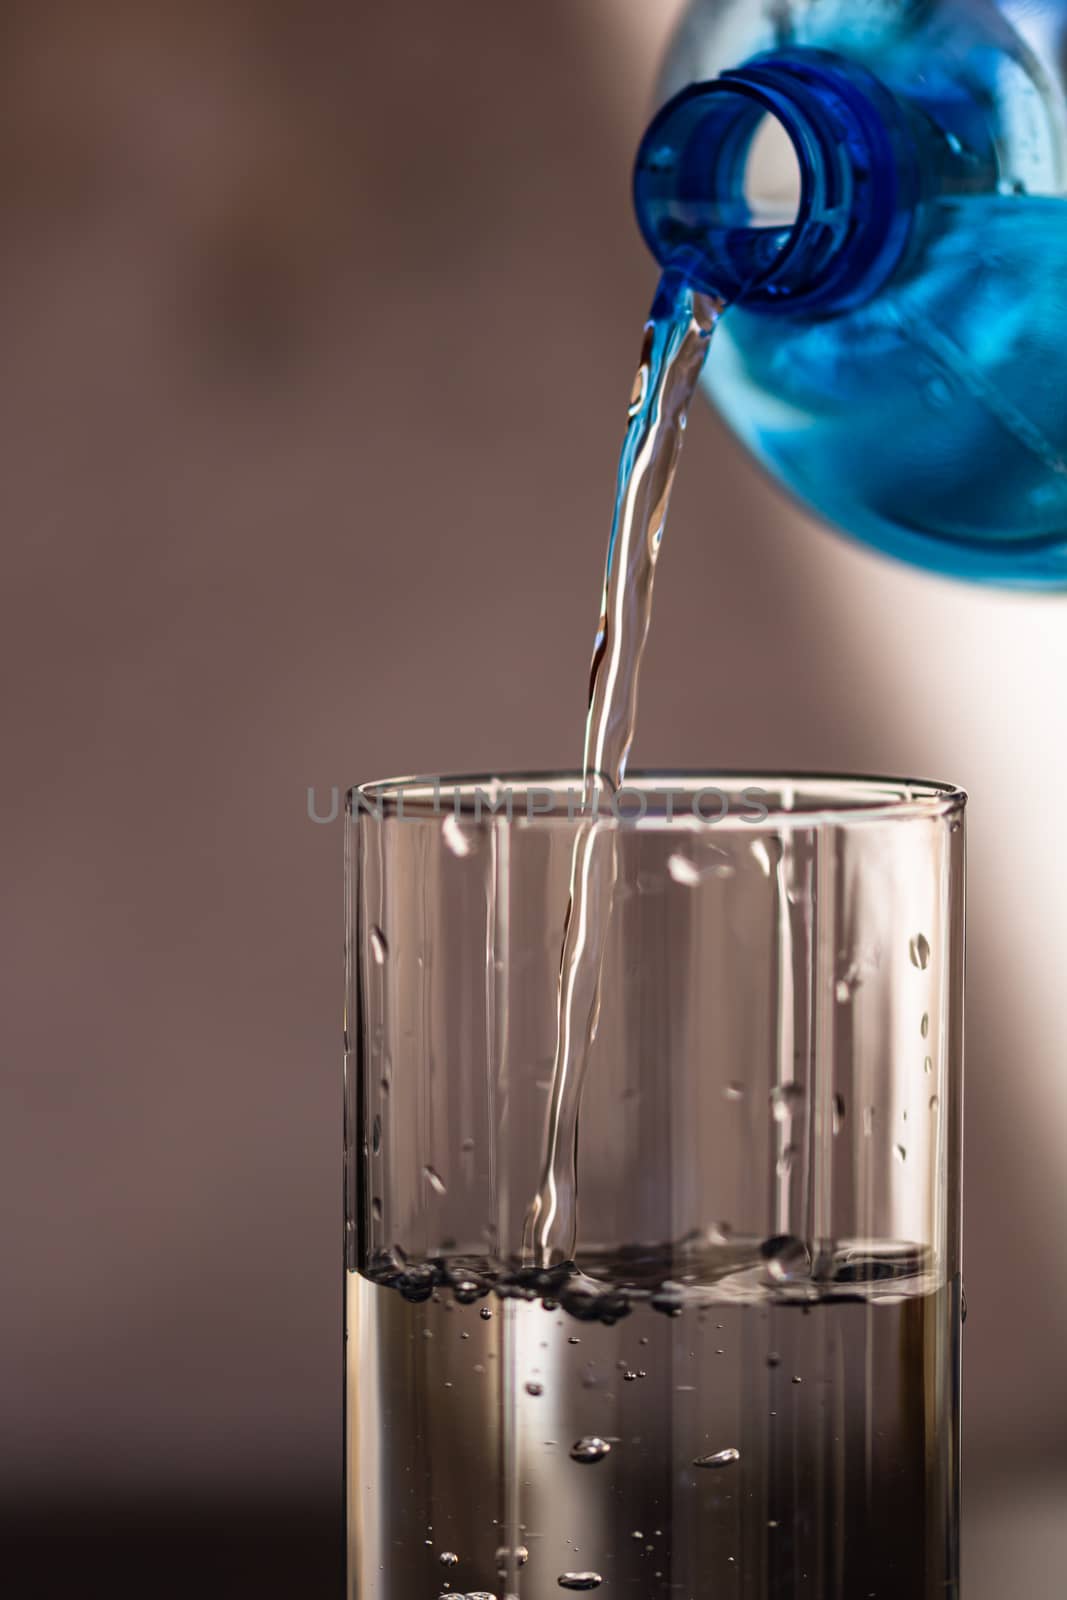 Pouring water from blue plastic bottle into a glass on blurred b by vladispas